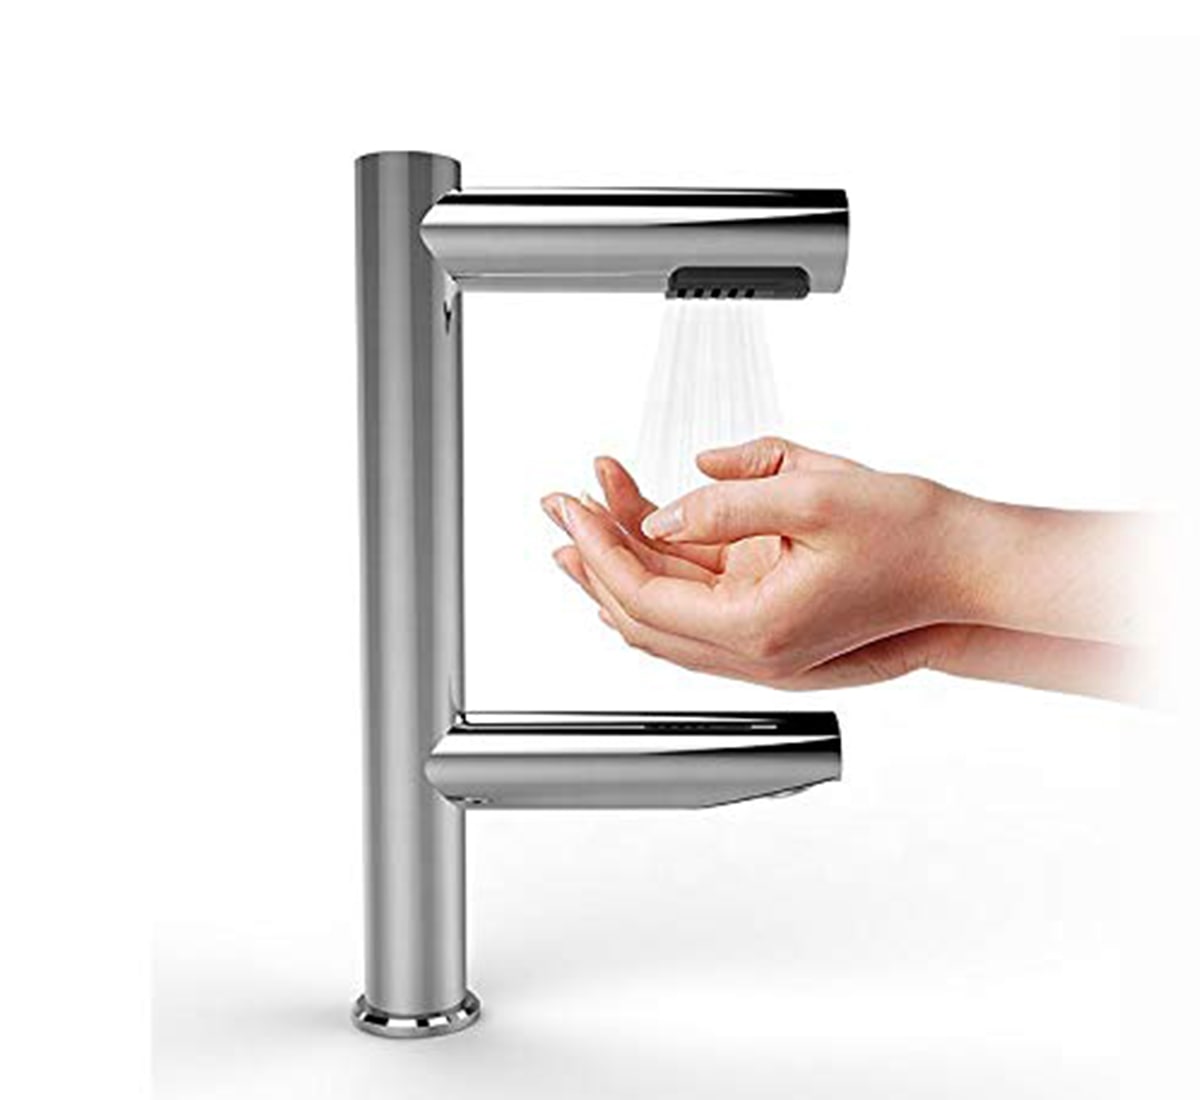 Silver 2 in 1 hand dryer with water tap